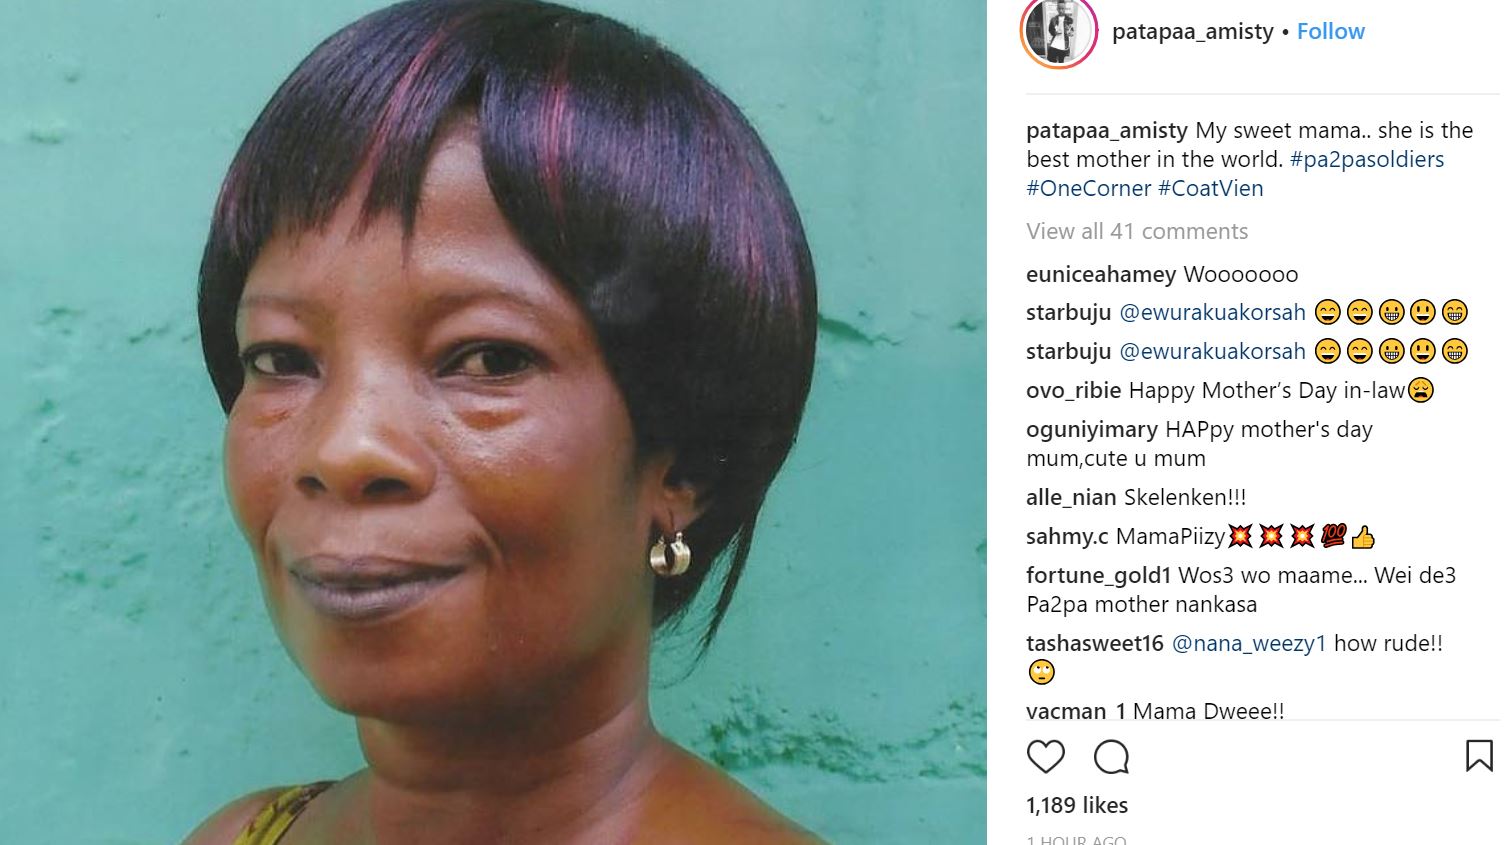 Patapaa Amisty's message to his beautiful mother is everything